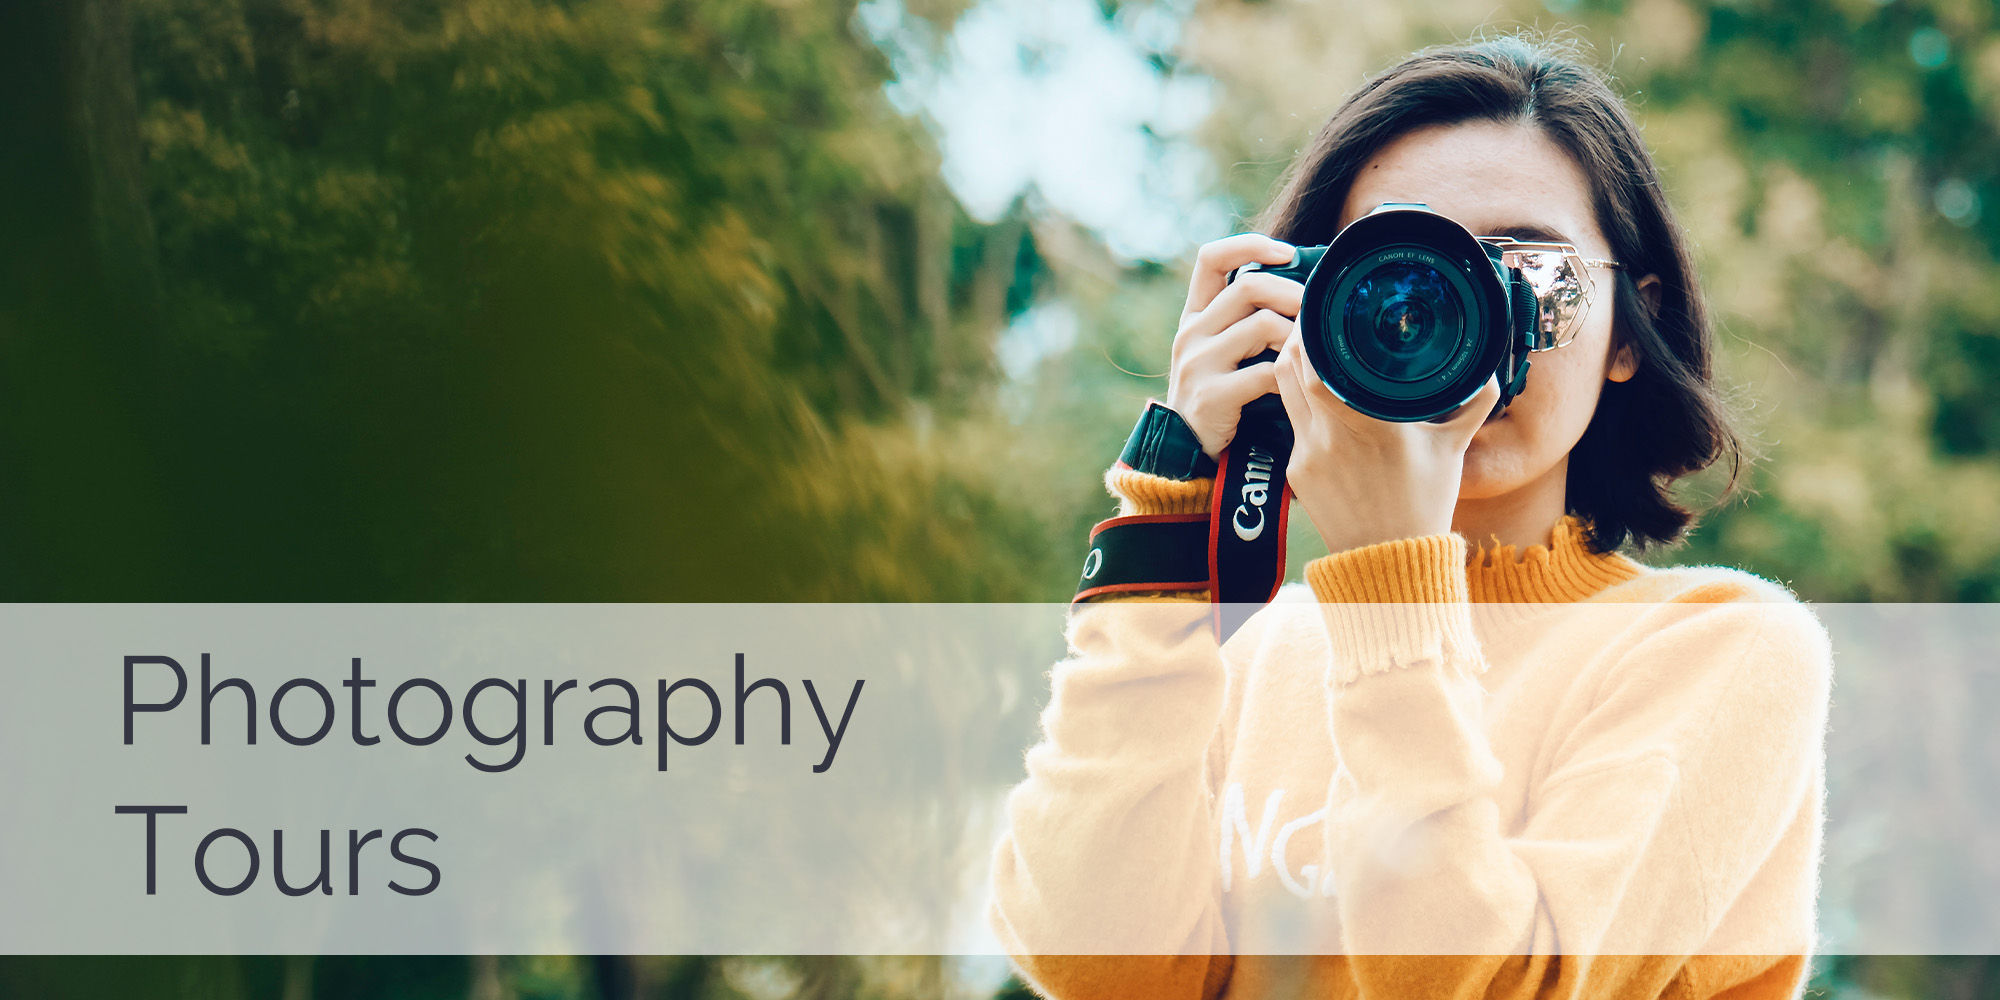 How to craft photography tours that inspire